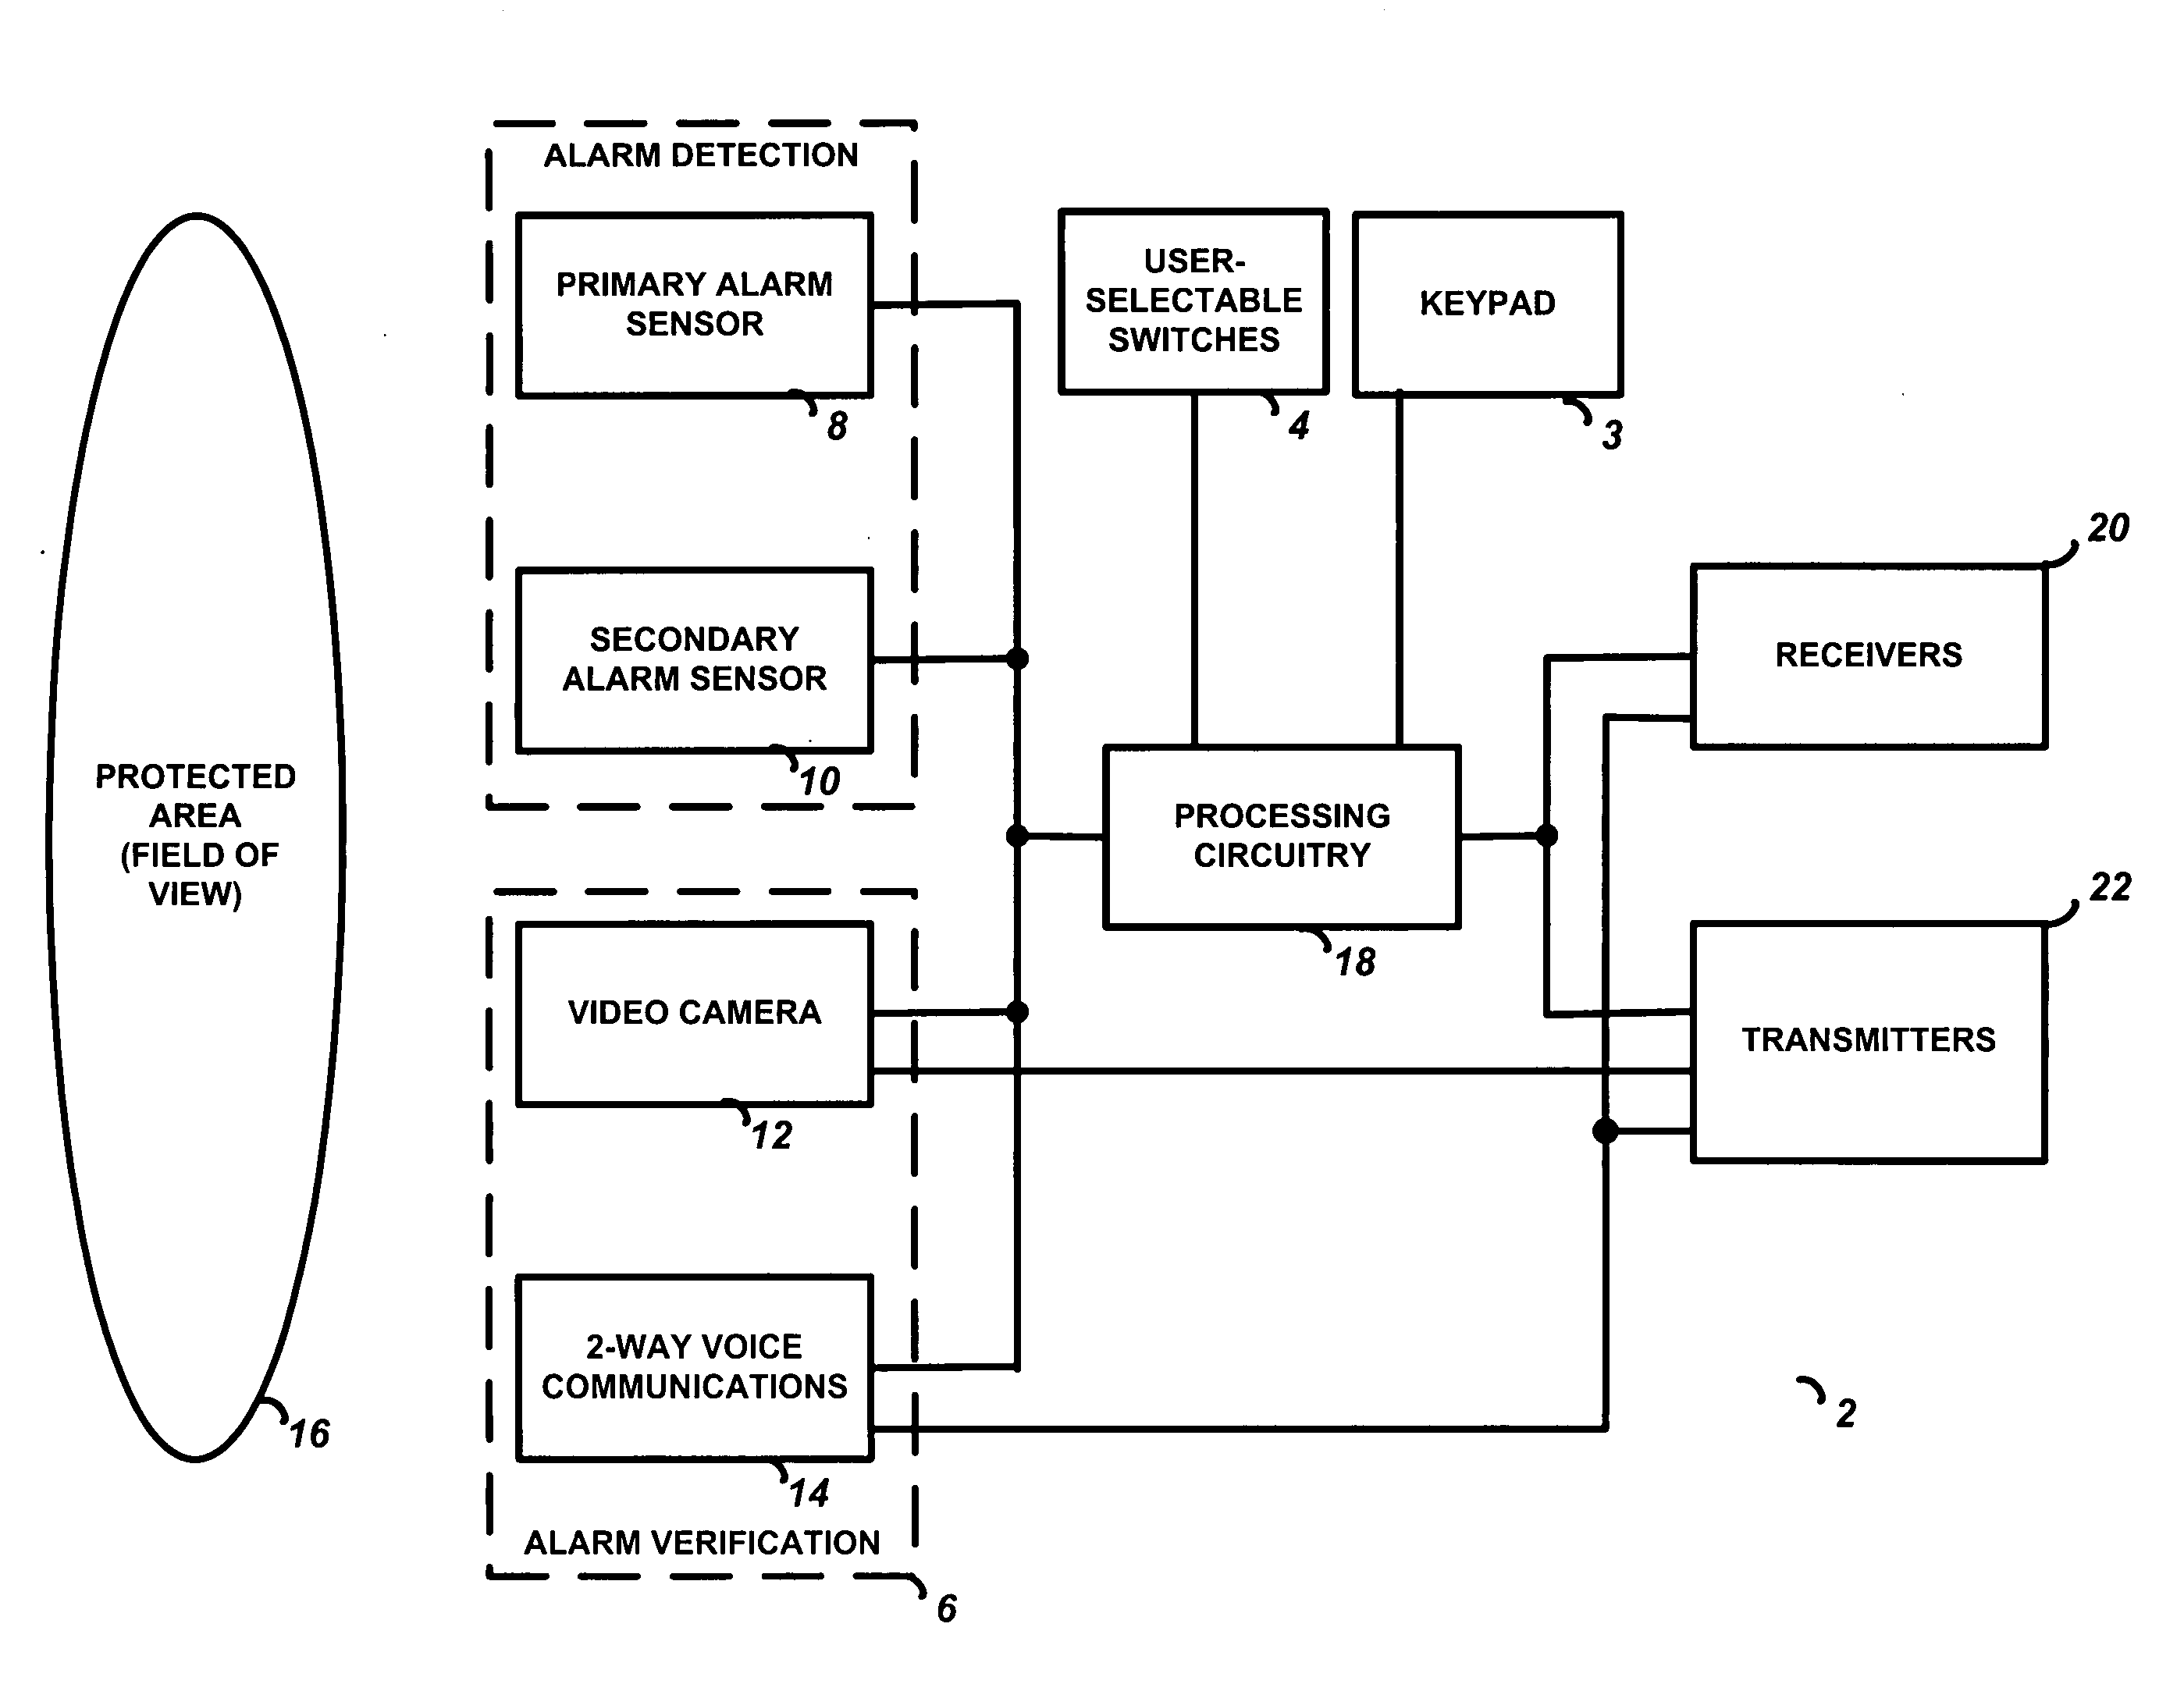 Integrated alarm detection and verification device